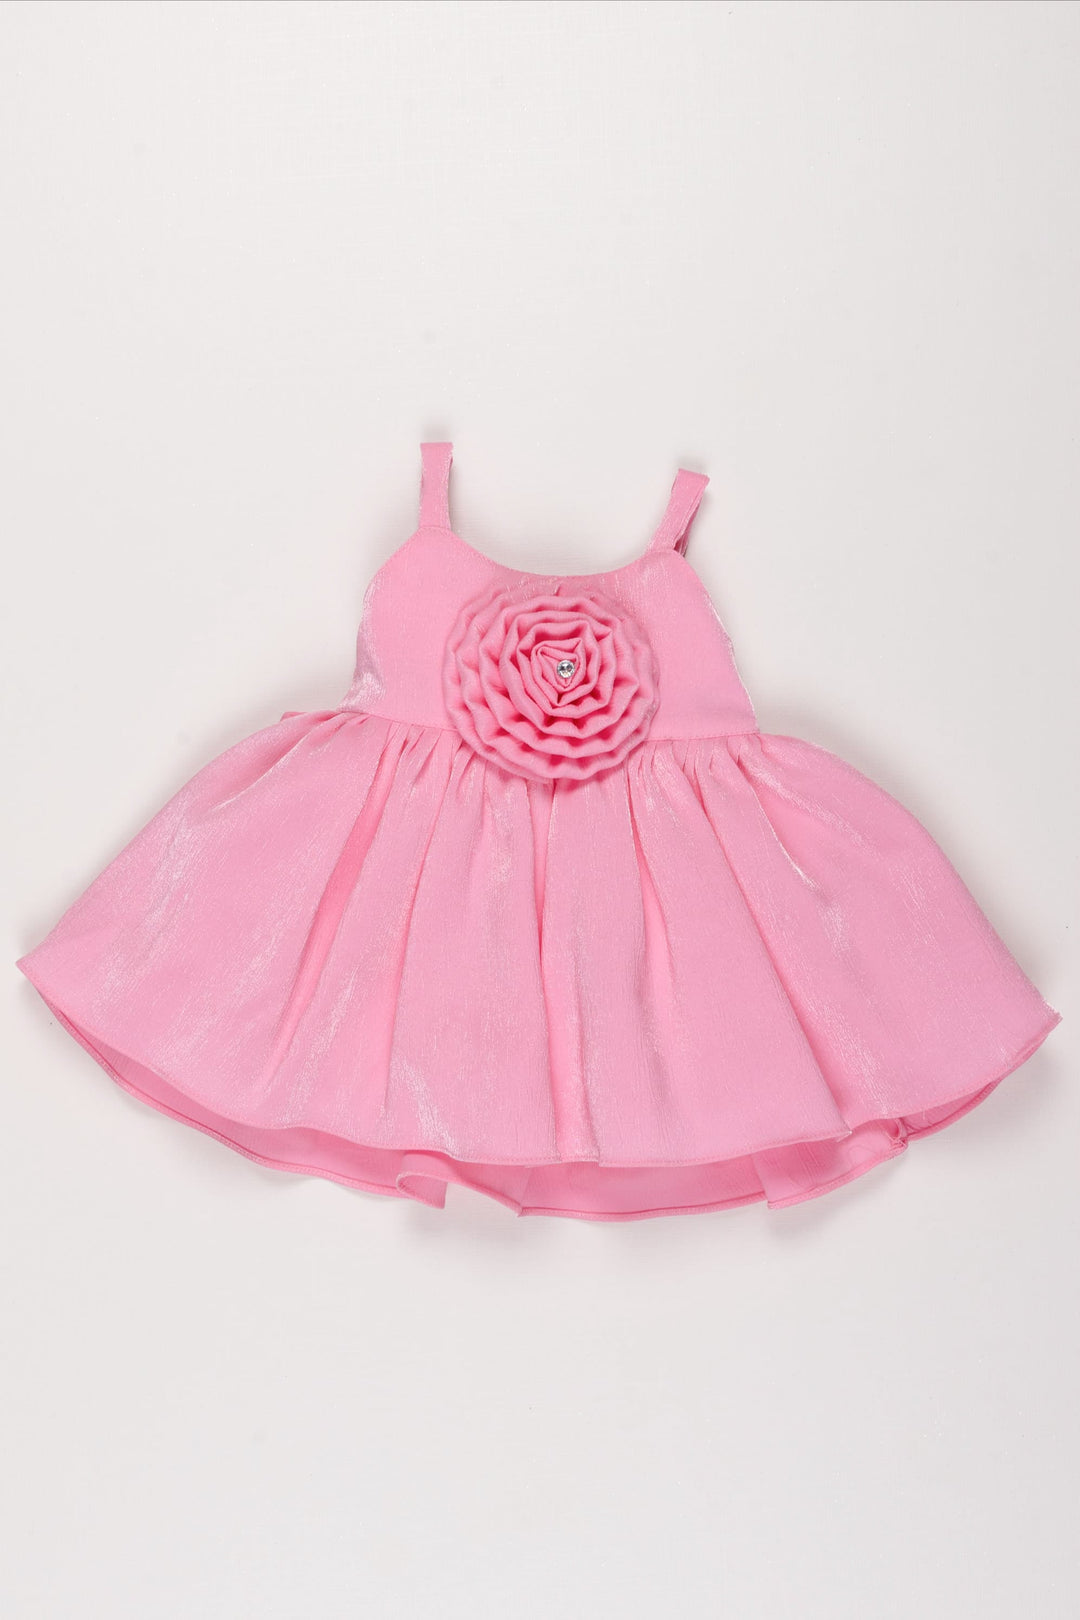 The Nesavu Baby Fancy Frock Infant Girl's Light Pink Organza Frock with Large Rosette Detail Nesavu 10 (NB) / Pink BFJ501A-10 Light Pink Rosette Organza Frock for Infants | Special Occasion Dress | The Nesavu